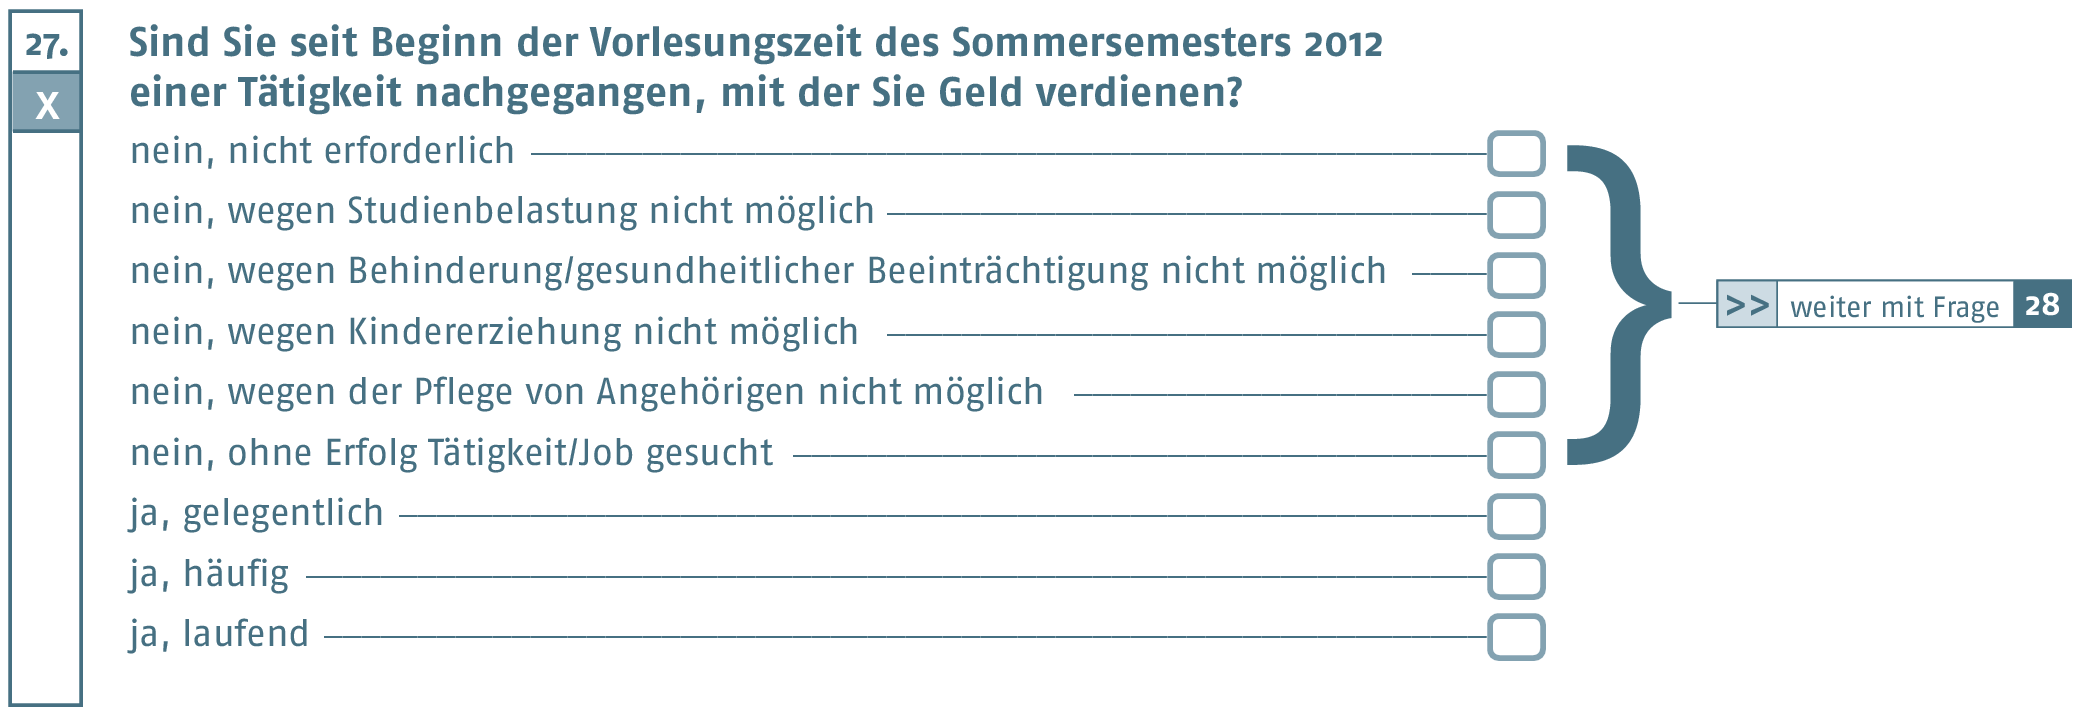 Did you have a job in which you earned money since the beginning of the Summer Semester 2012?